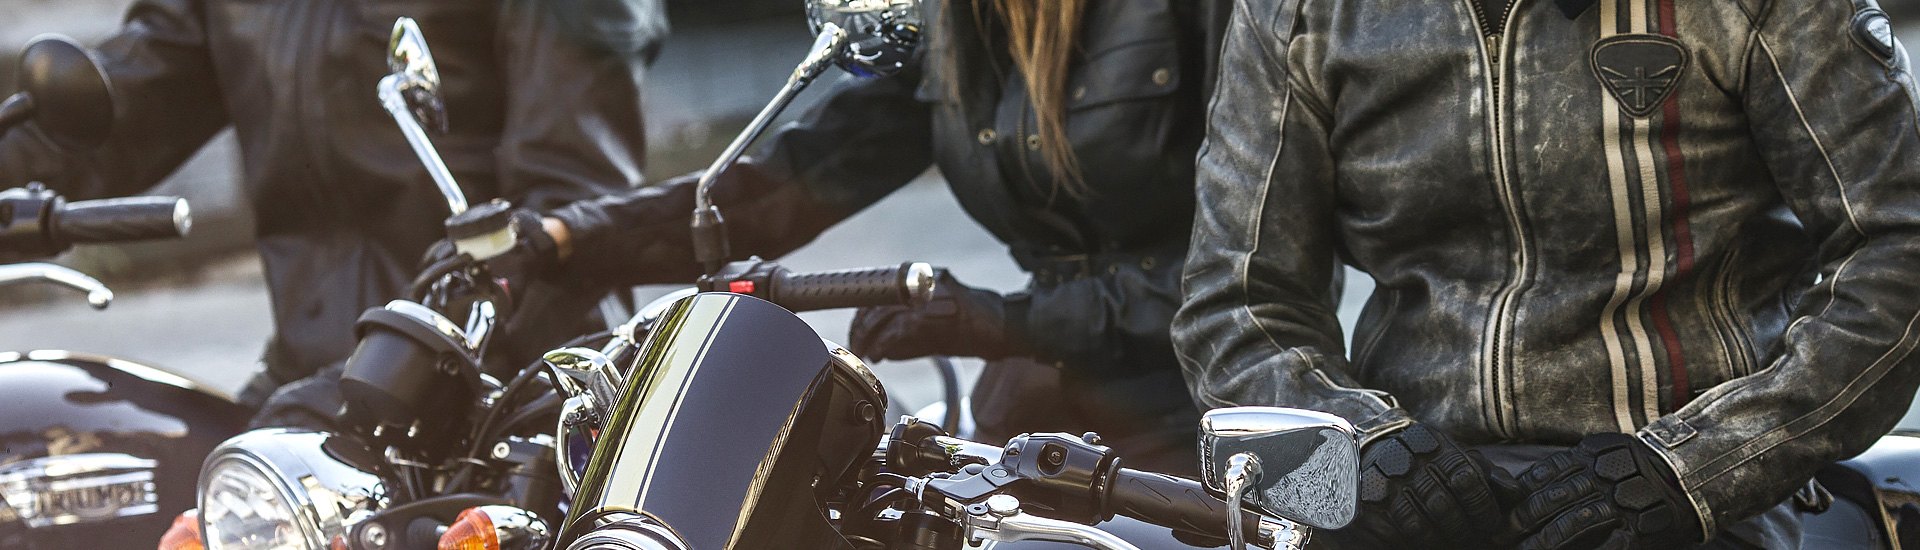 Choosing The Riding Gear That Best Fits Your Type Of Motorcycle